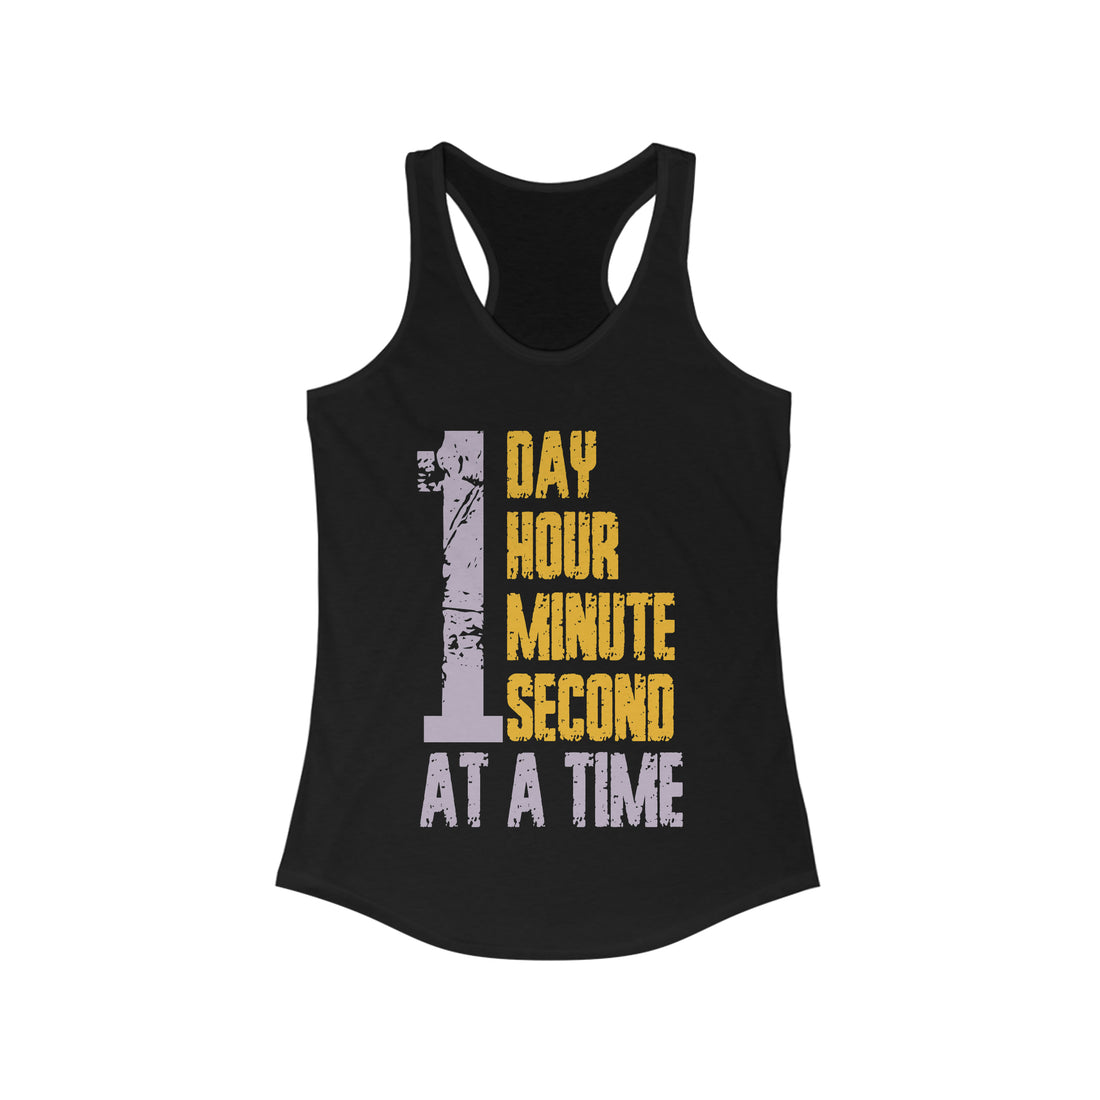 1 Day Hour Minute Second At A Time - Racerback Tank Top